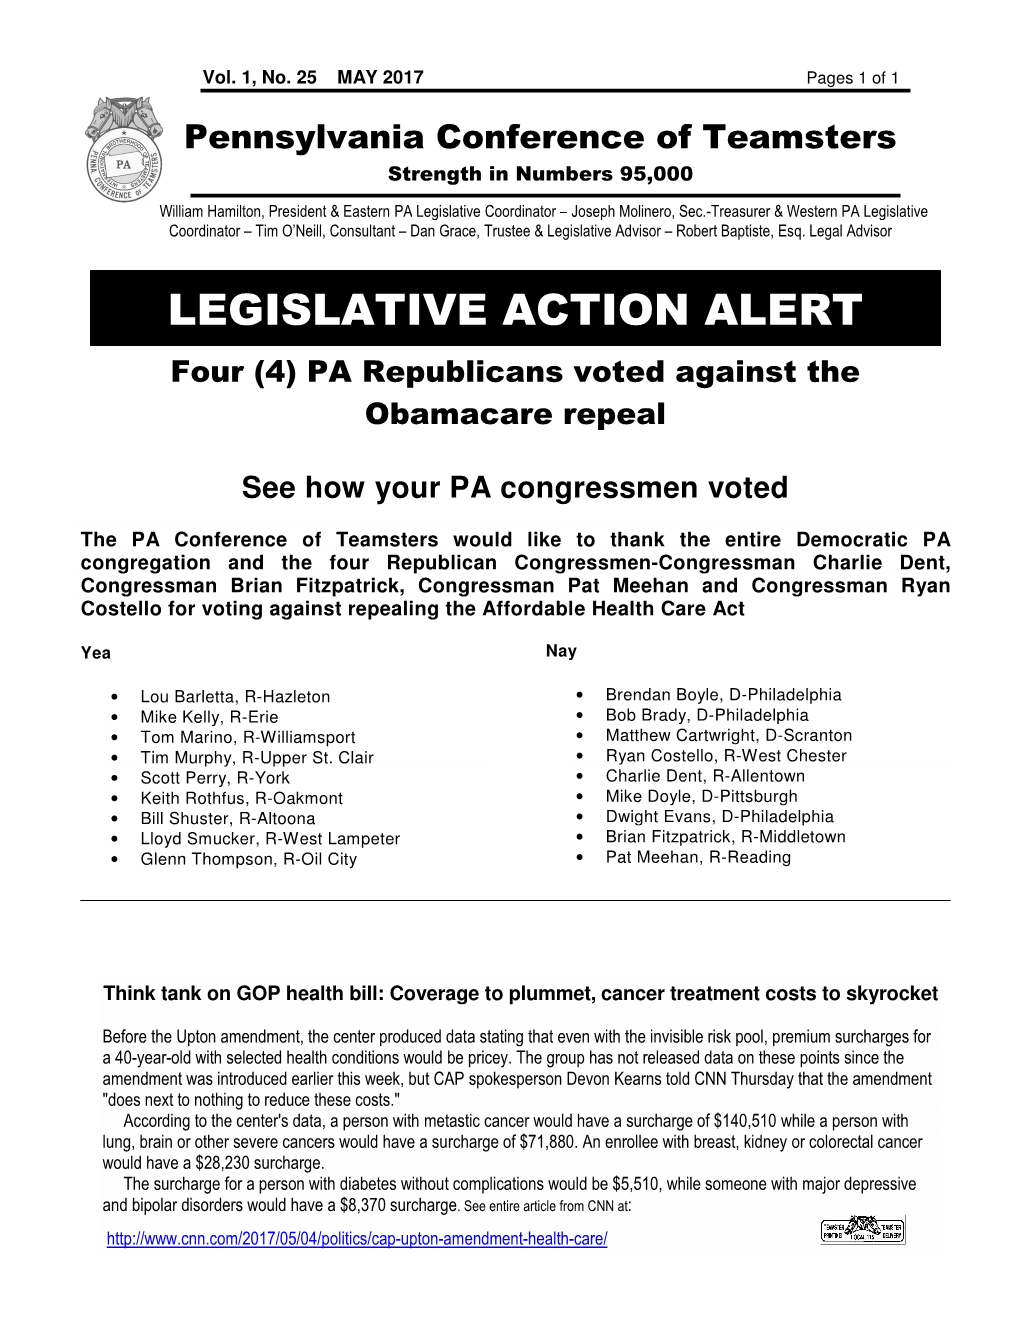 LEGISLATIVE ACTION ALERT Four (4) PA Republicans Voted Against the Obamacare Repeal